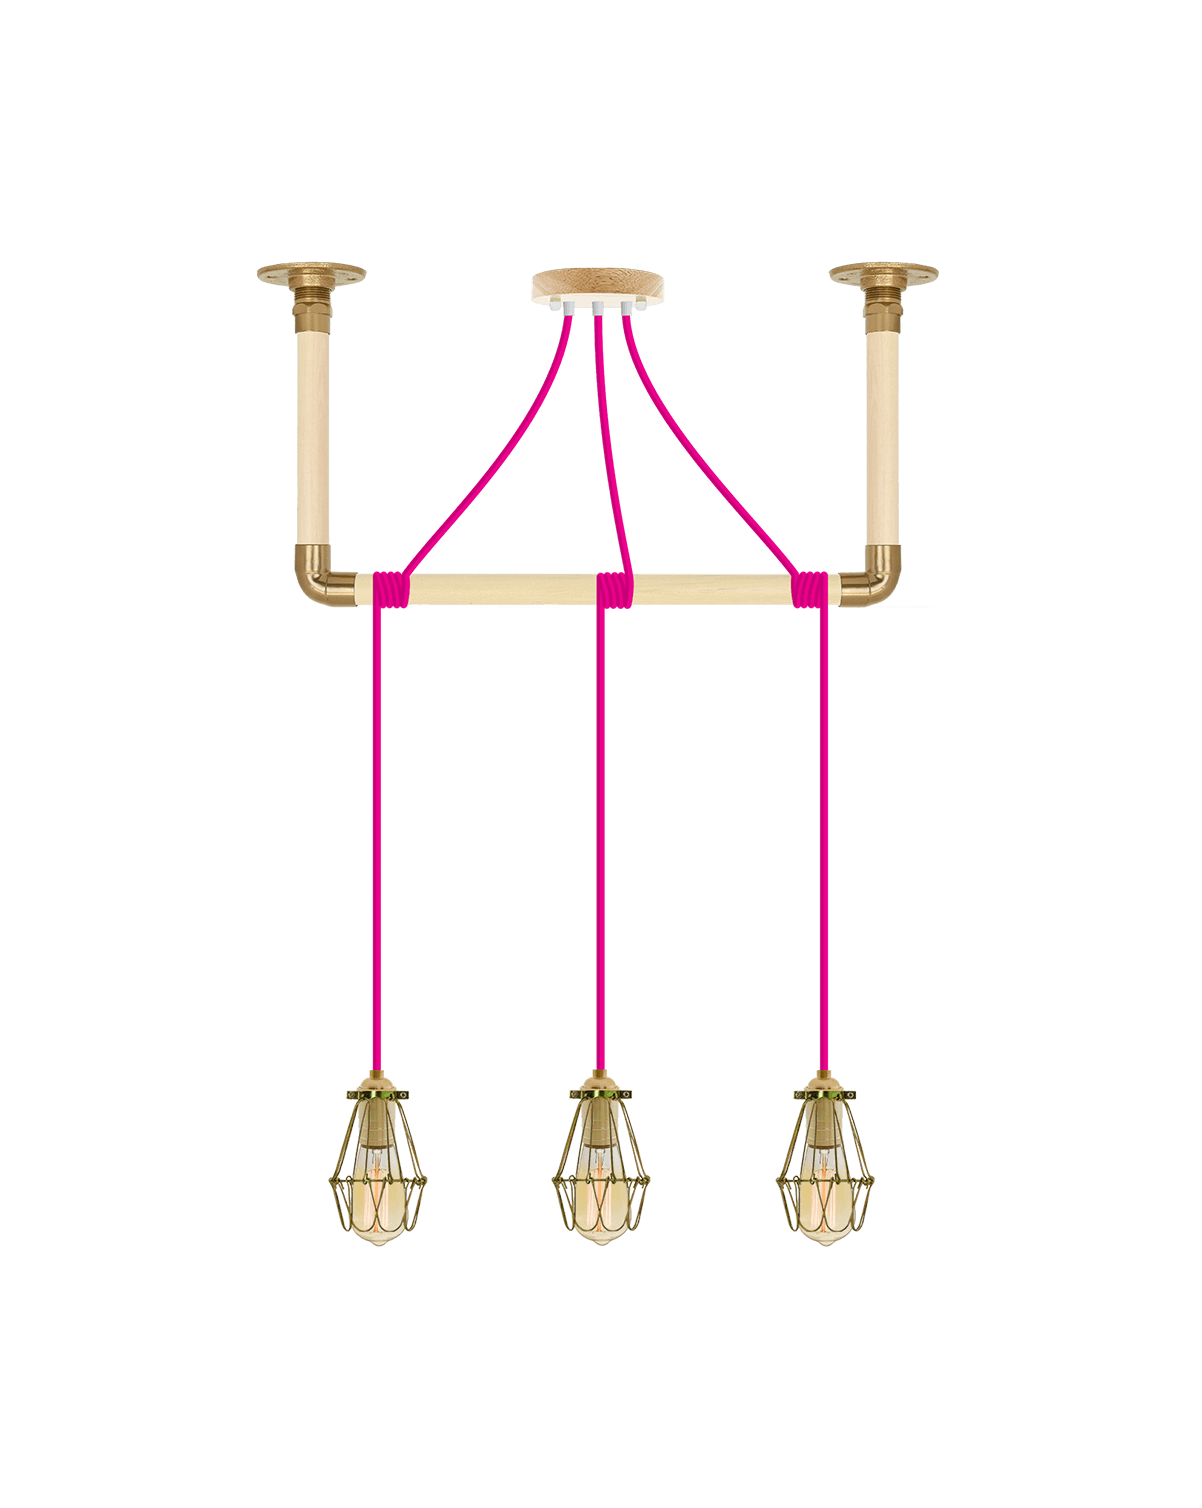 Wrap Chandelier: Pink and Brass Cage Hangout Lighting 3 Pendants